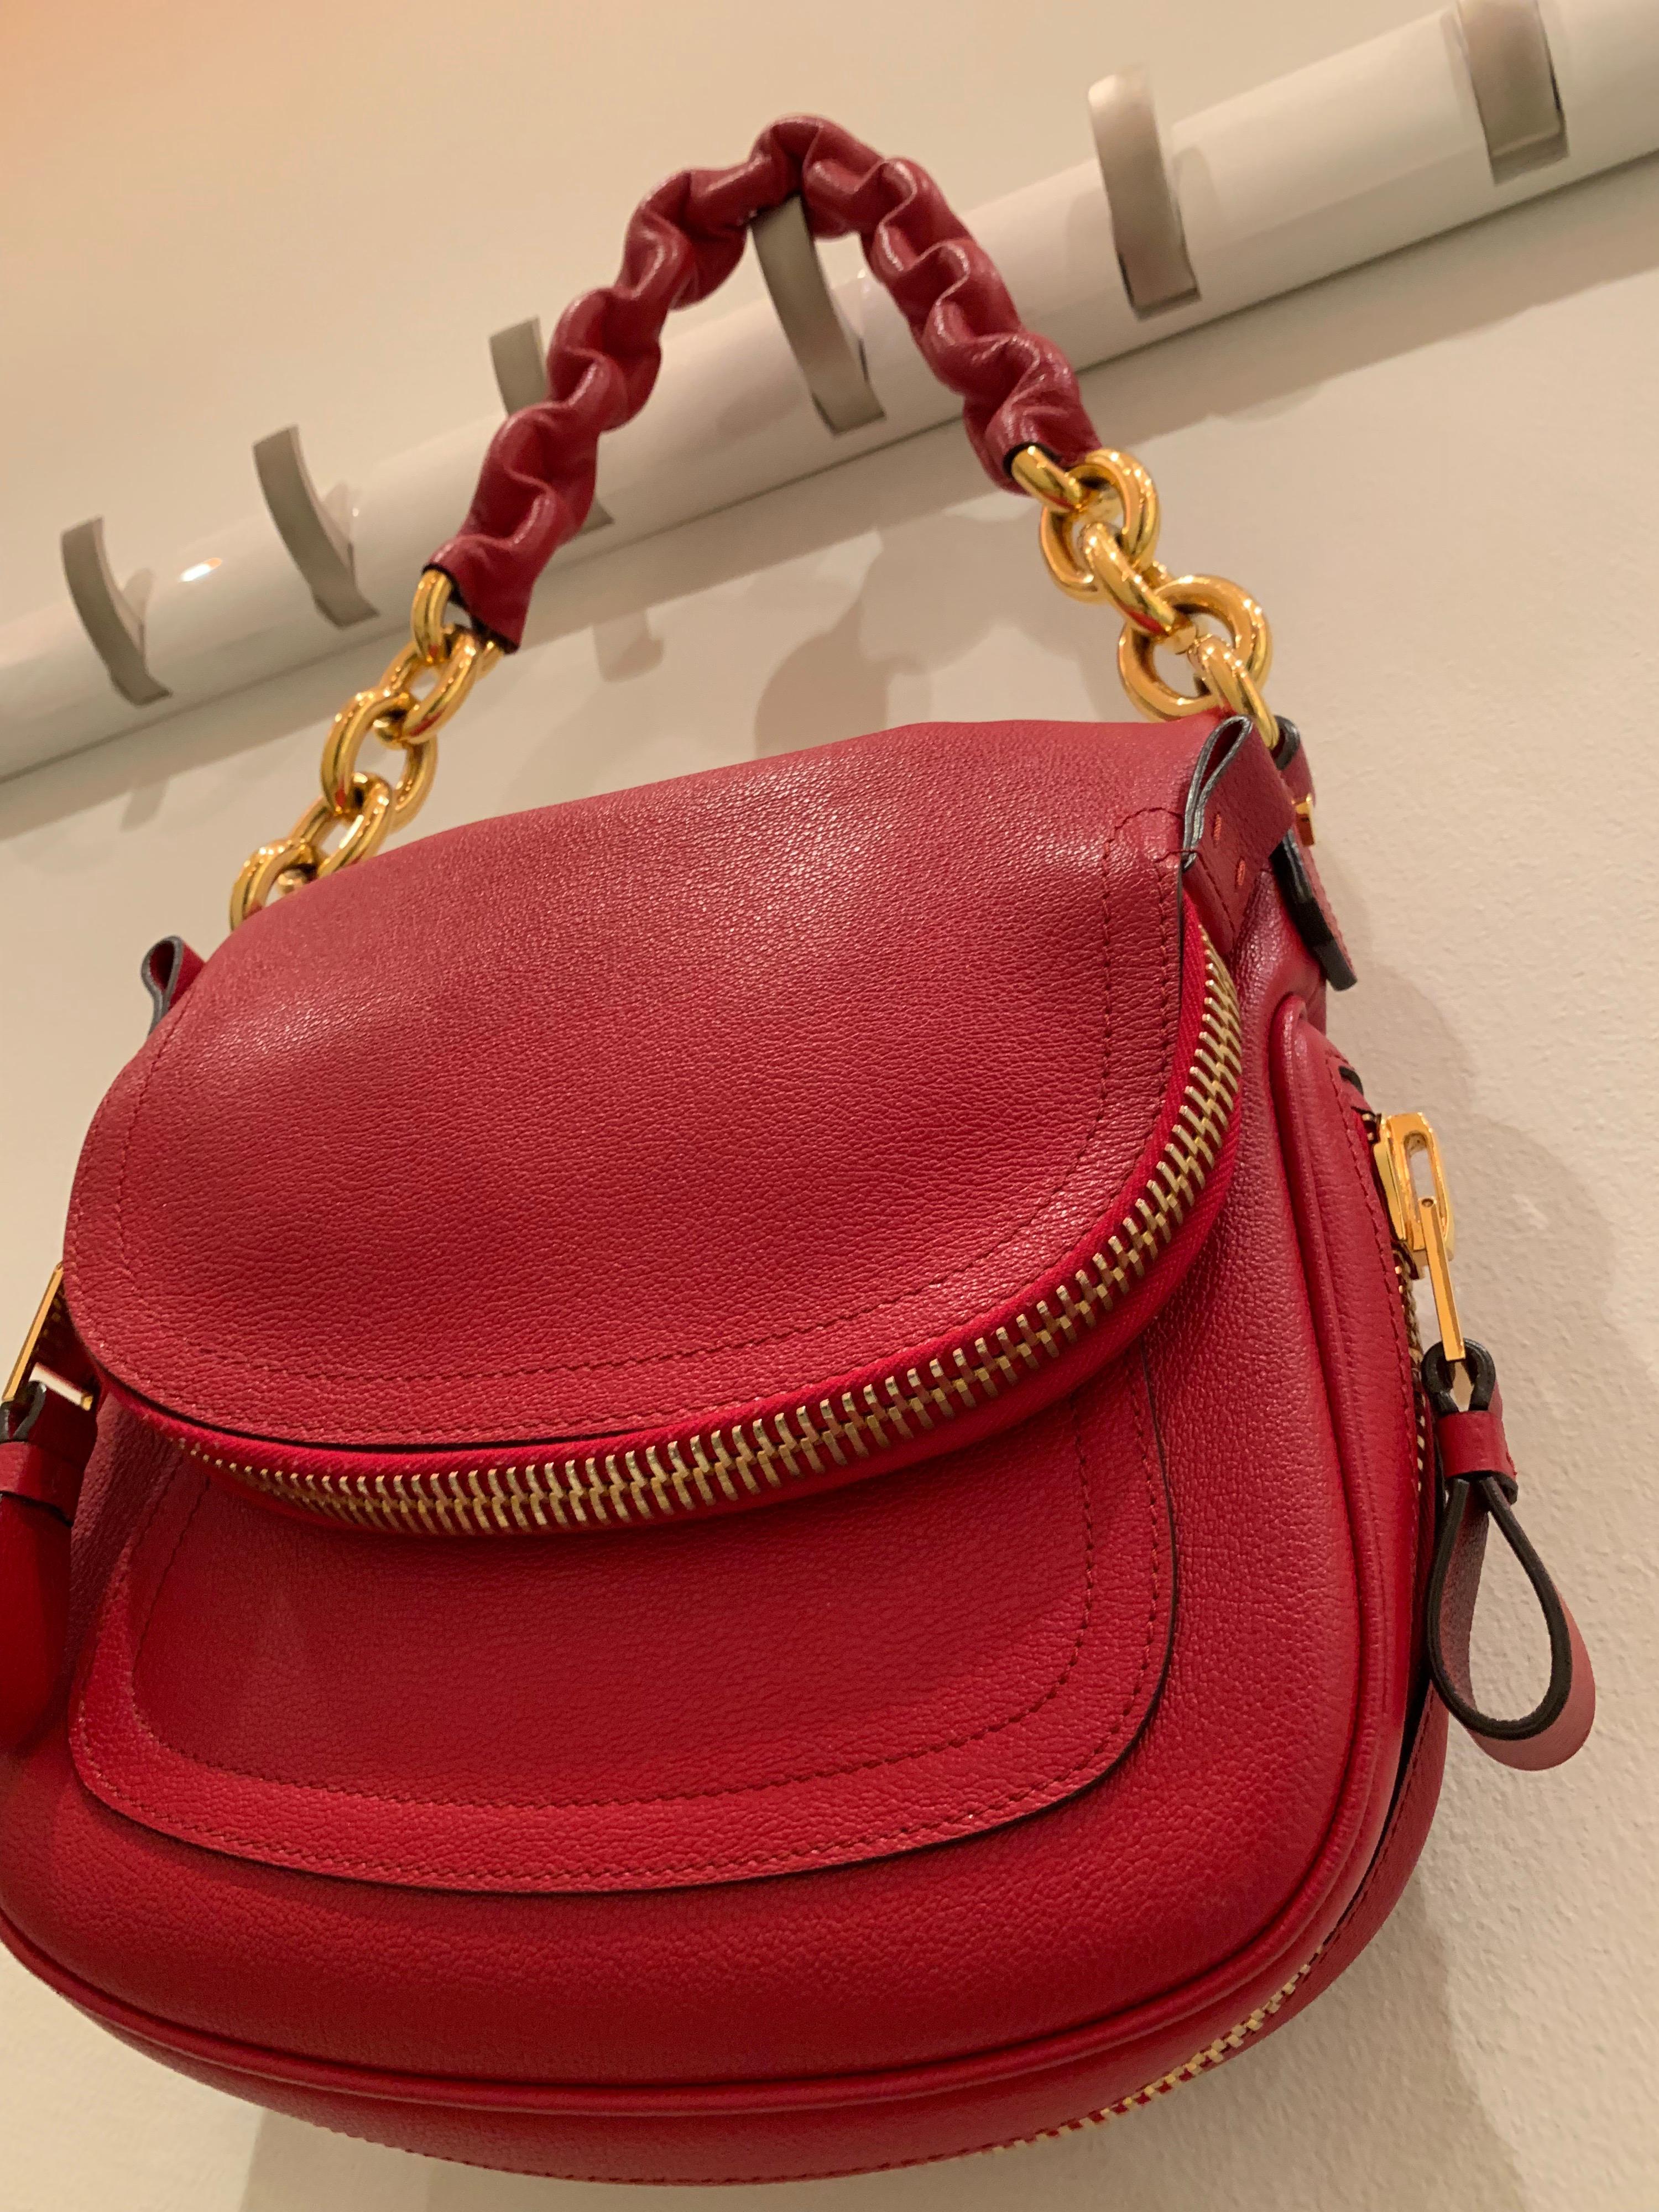 A fabulous new-never used Tom Ford crimson textured leather saddlebag-styled shoulder bag with heavy gold chain handle.  Handle at grip has leather molded around chain for comfort.  Saddle flap is a zippered pocket.  Originally purchased at Bergdorf